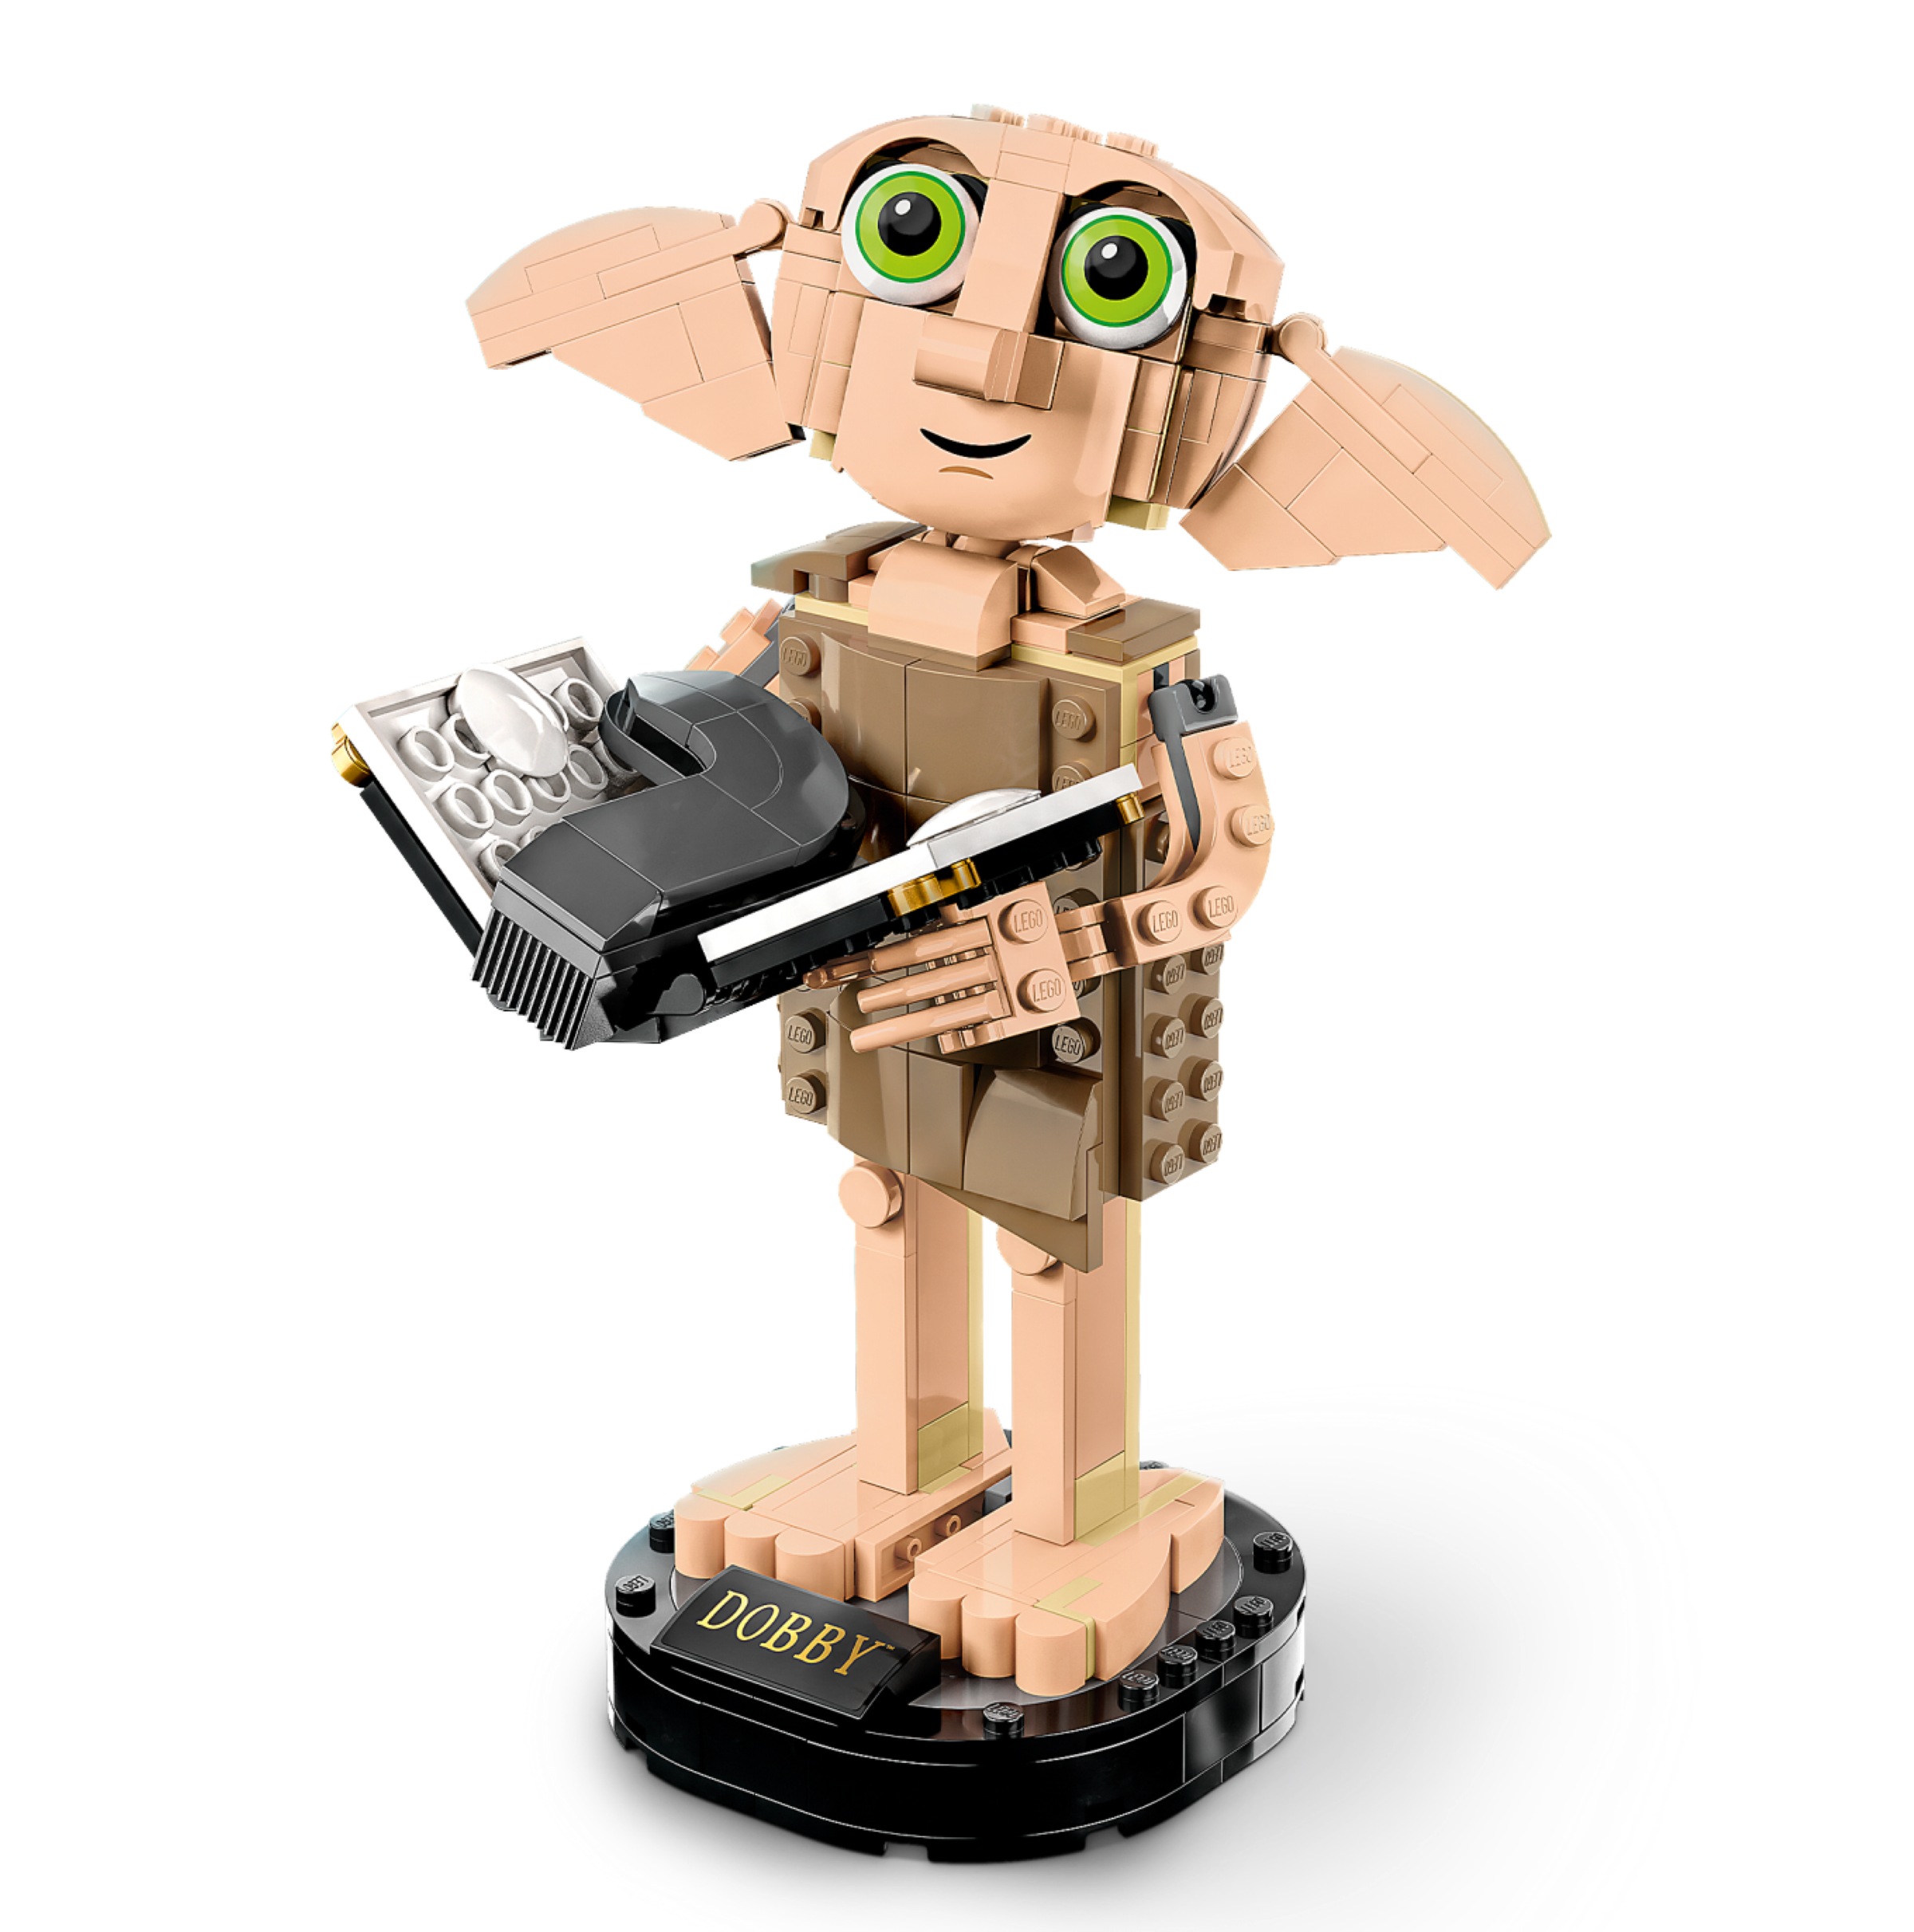 LEGO MINIFIGURE HARRY POTTER DOBBY HOUSE ELF HP105 FROM 4736 FREEING DOBBY